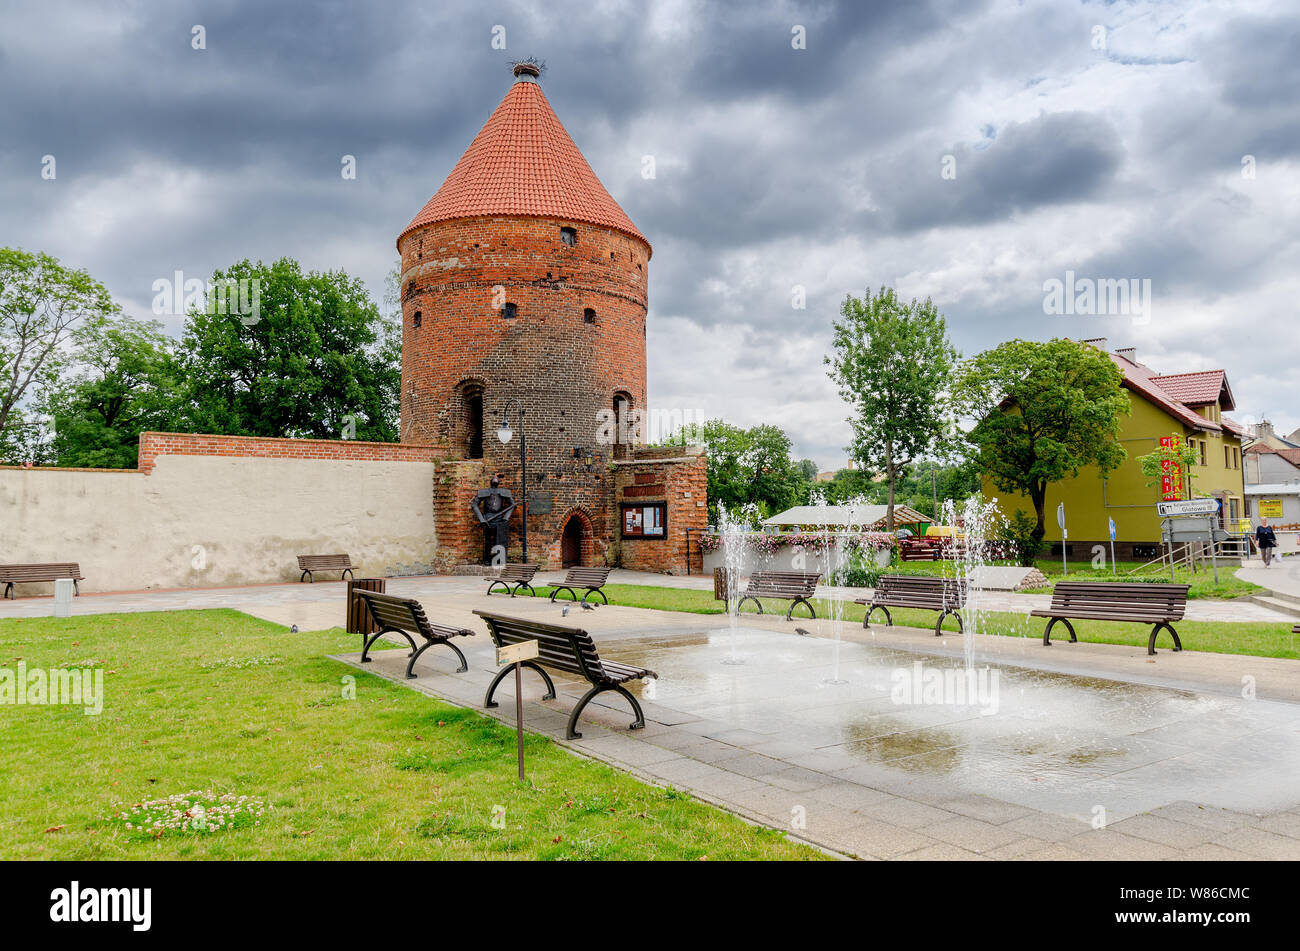 Dobre Miasto, ger. Guttstadt, warmian-mazurian province, Poland. The gothic Stork Tower, remains of the medieval city walls. Stock Photo